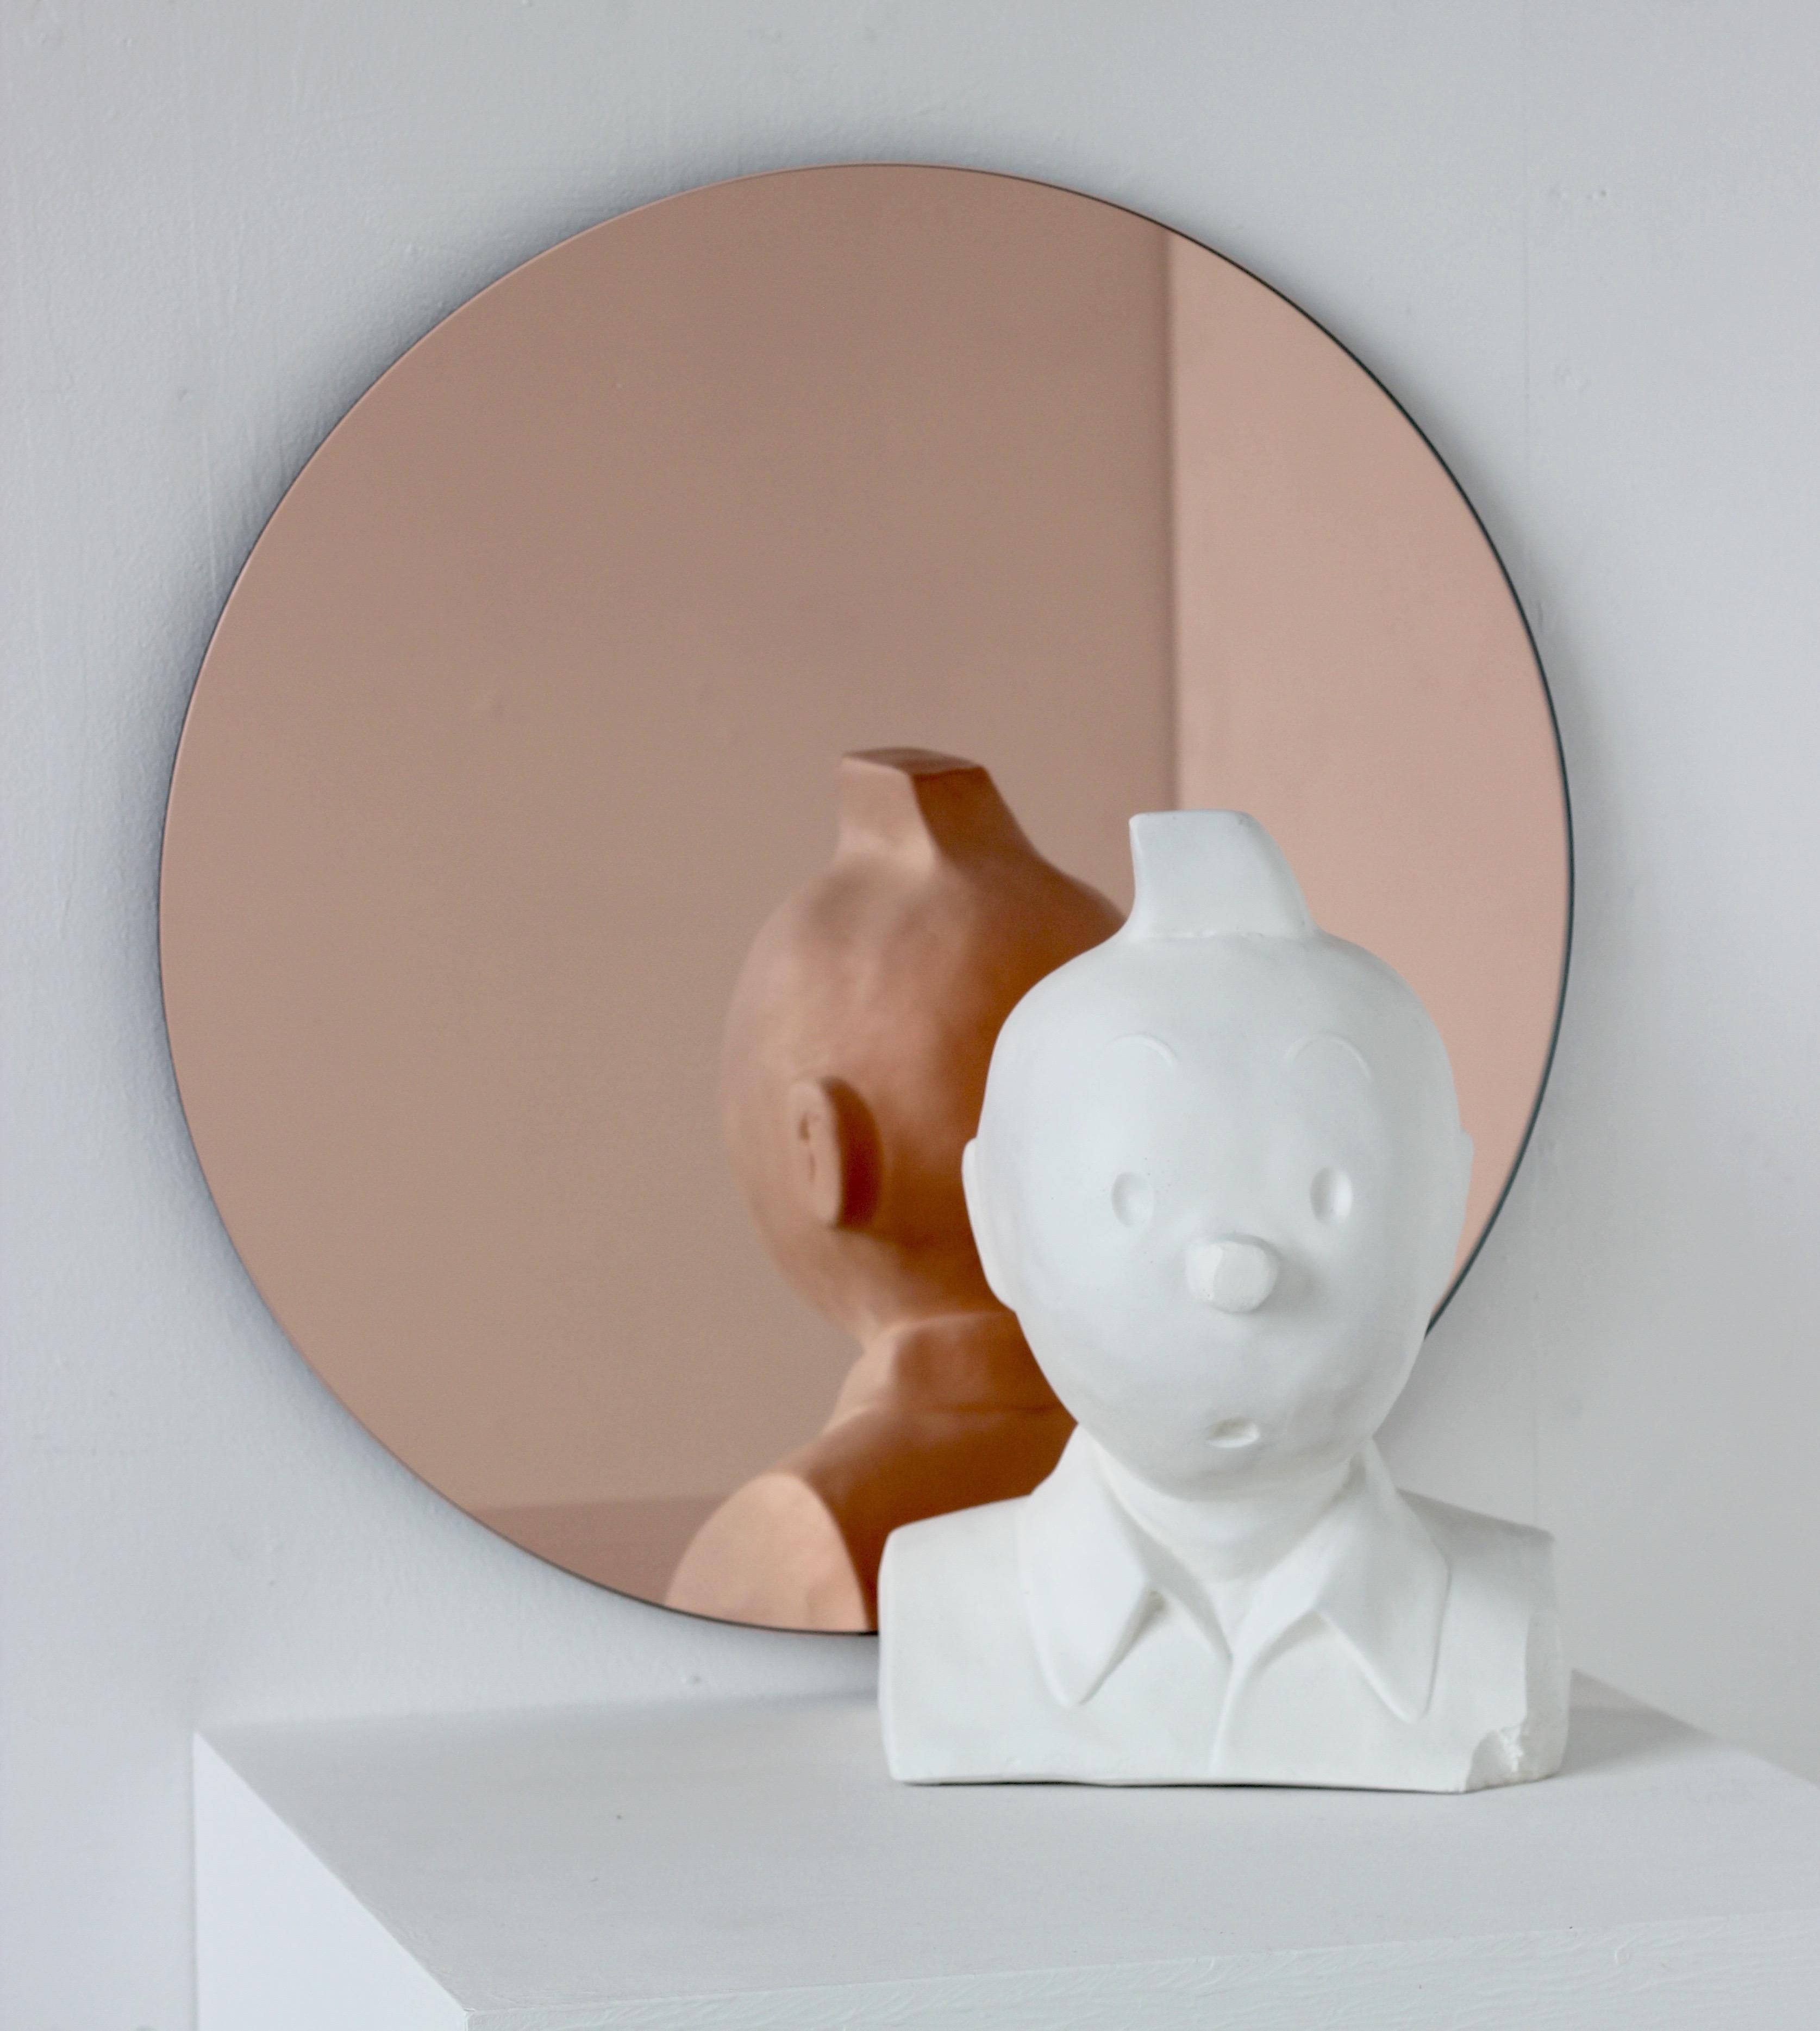 Minimalist rose gold / peach tinted round frameless Orbis™ mirror with a floating effect. Quality design that ensures the mirror sits perfectly parallel to the wall. Designed and made in London, UK.

Fitted with professional plates not visible once